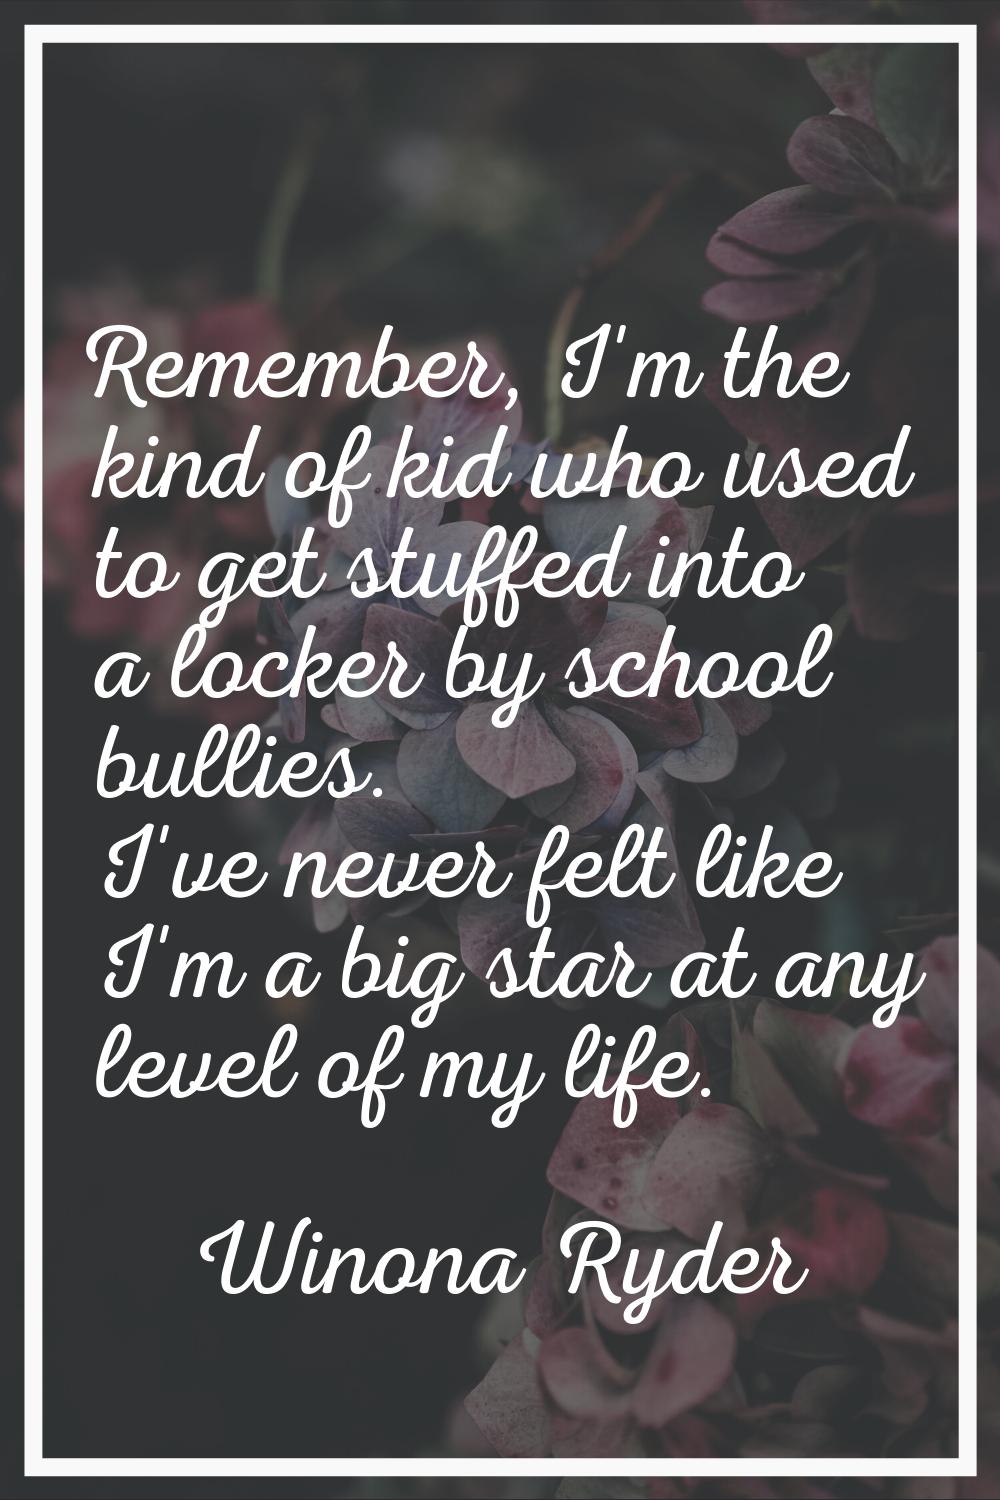 Remember, I'm the kind of kid who used to get stuffed into a locker by school bullies. I've never f